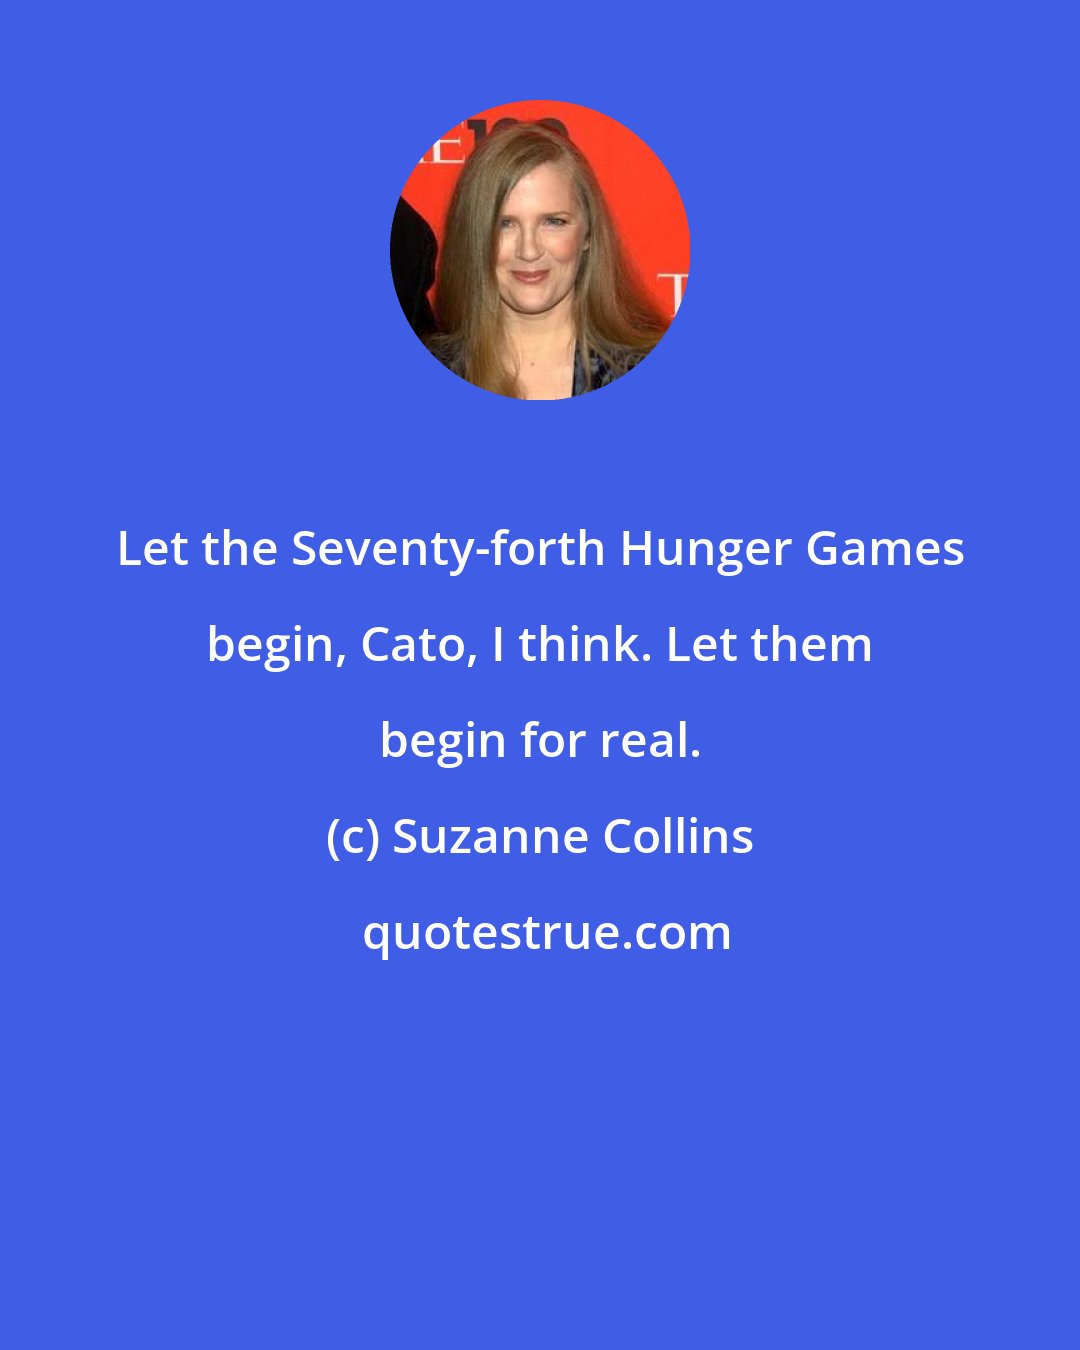 Suzanne Collins: Let the Seventy-forth Hunger Games begin, Cato, I think. Let them begin for real.